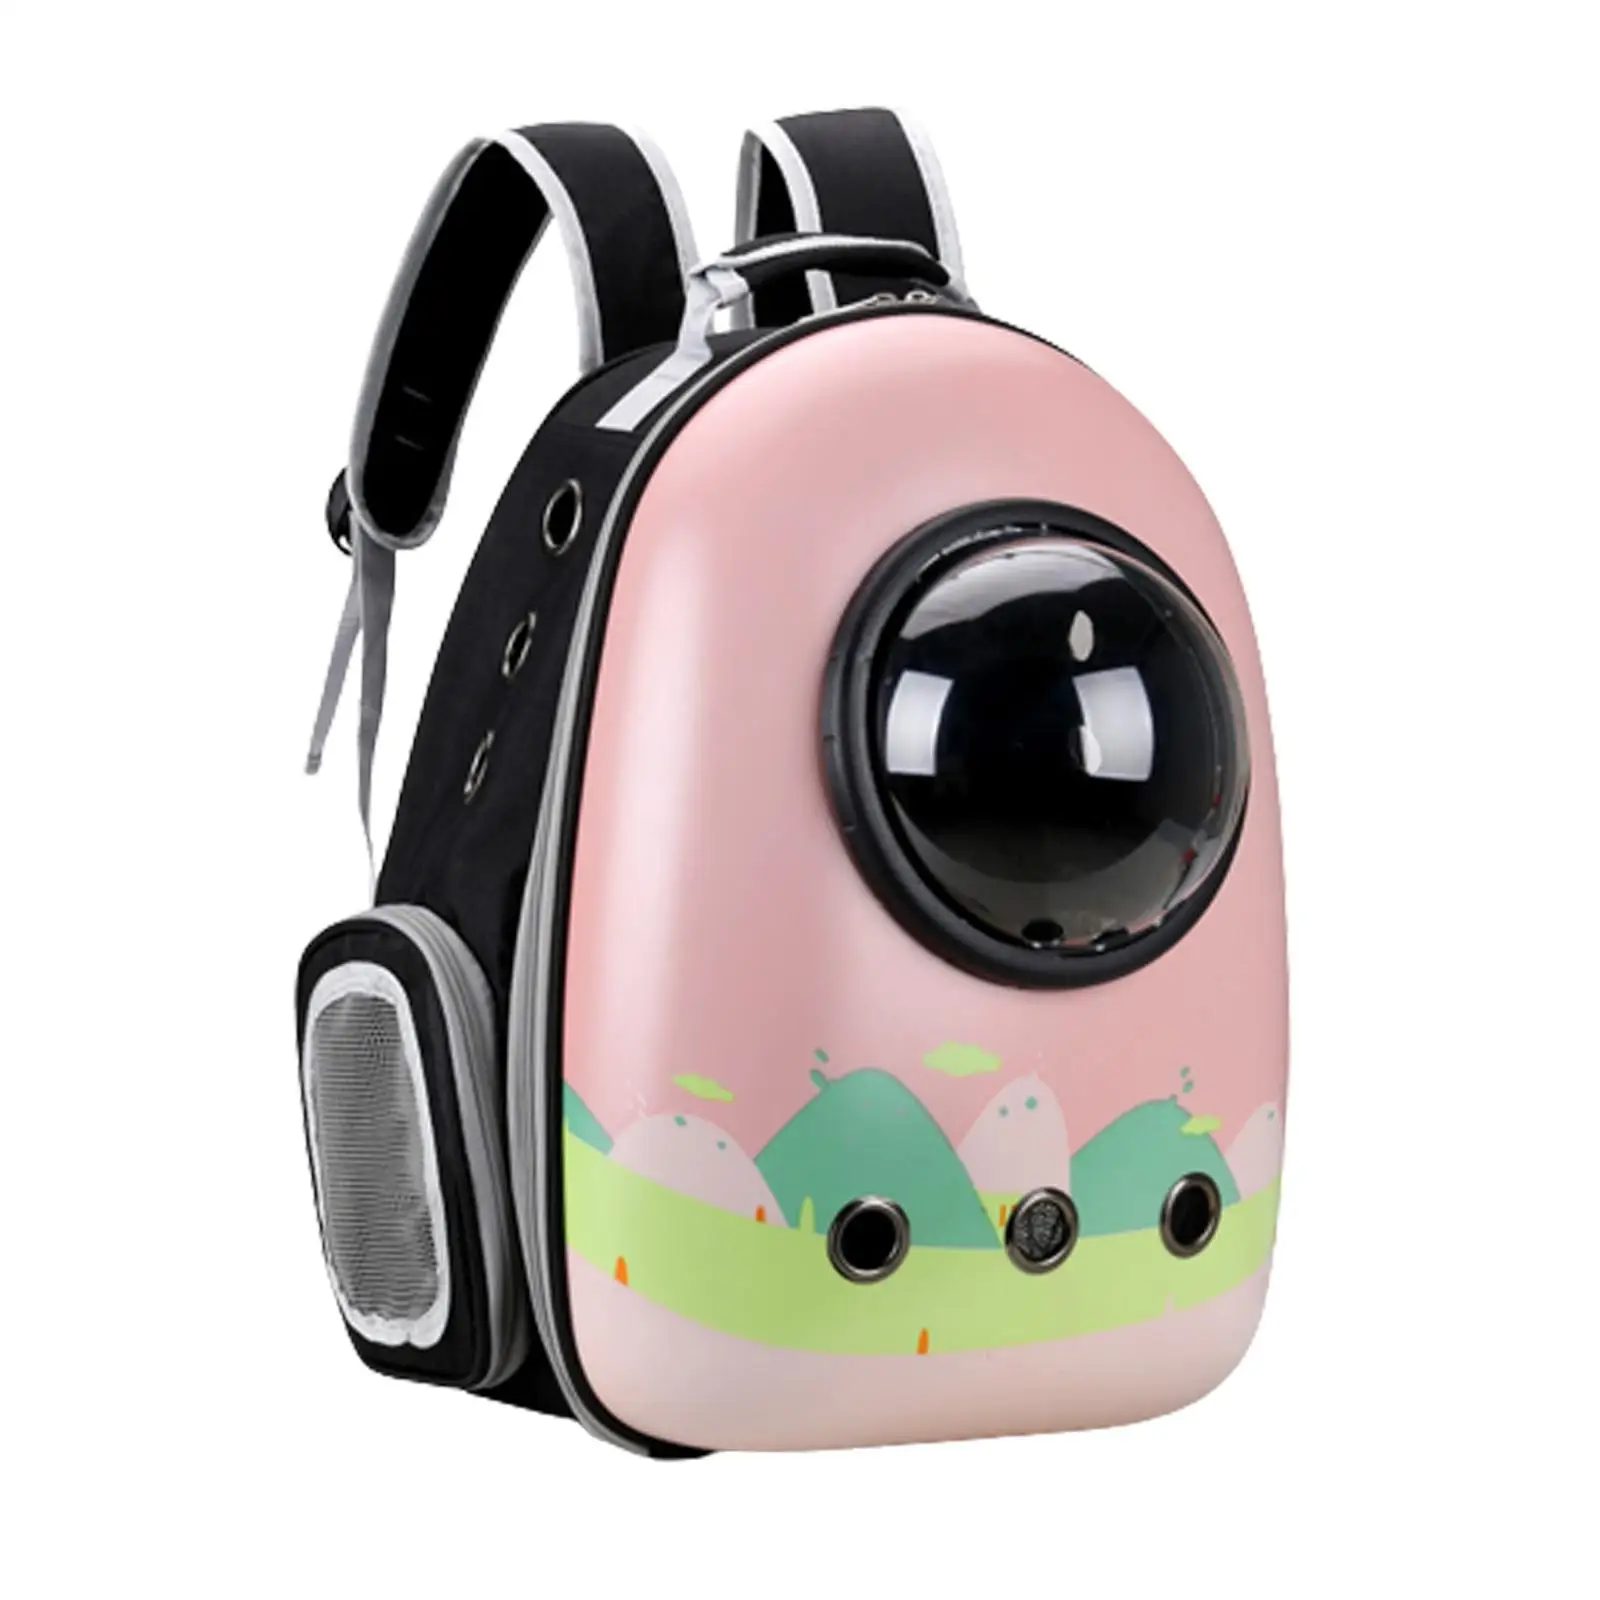 Cat Carrier Backpack Carrying Bag Ventilation Portable Small Dogs Cats Travel Carrier for Outdoor Camping Travel Walking Hiking